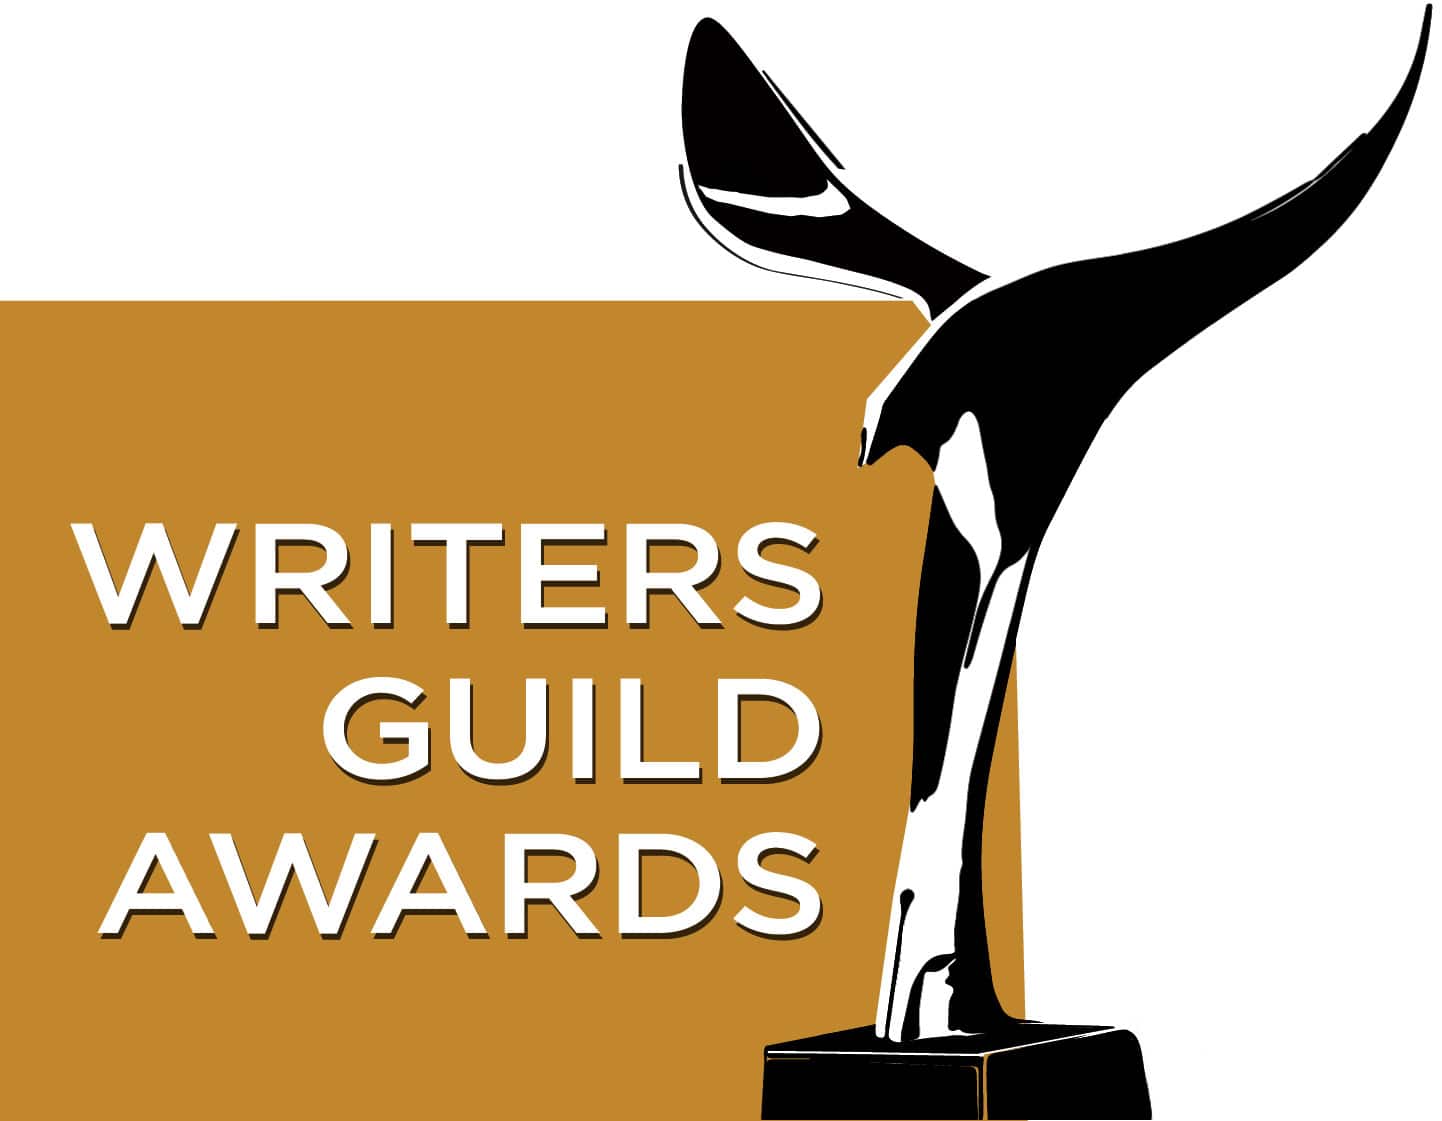 Writers Guild Awards 2021